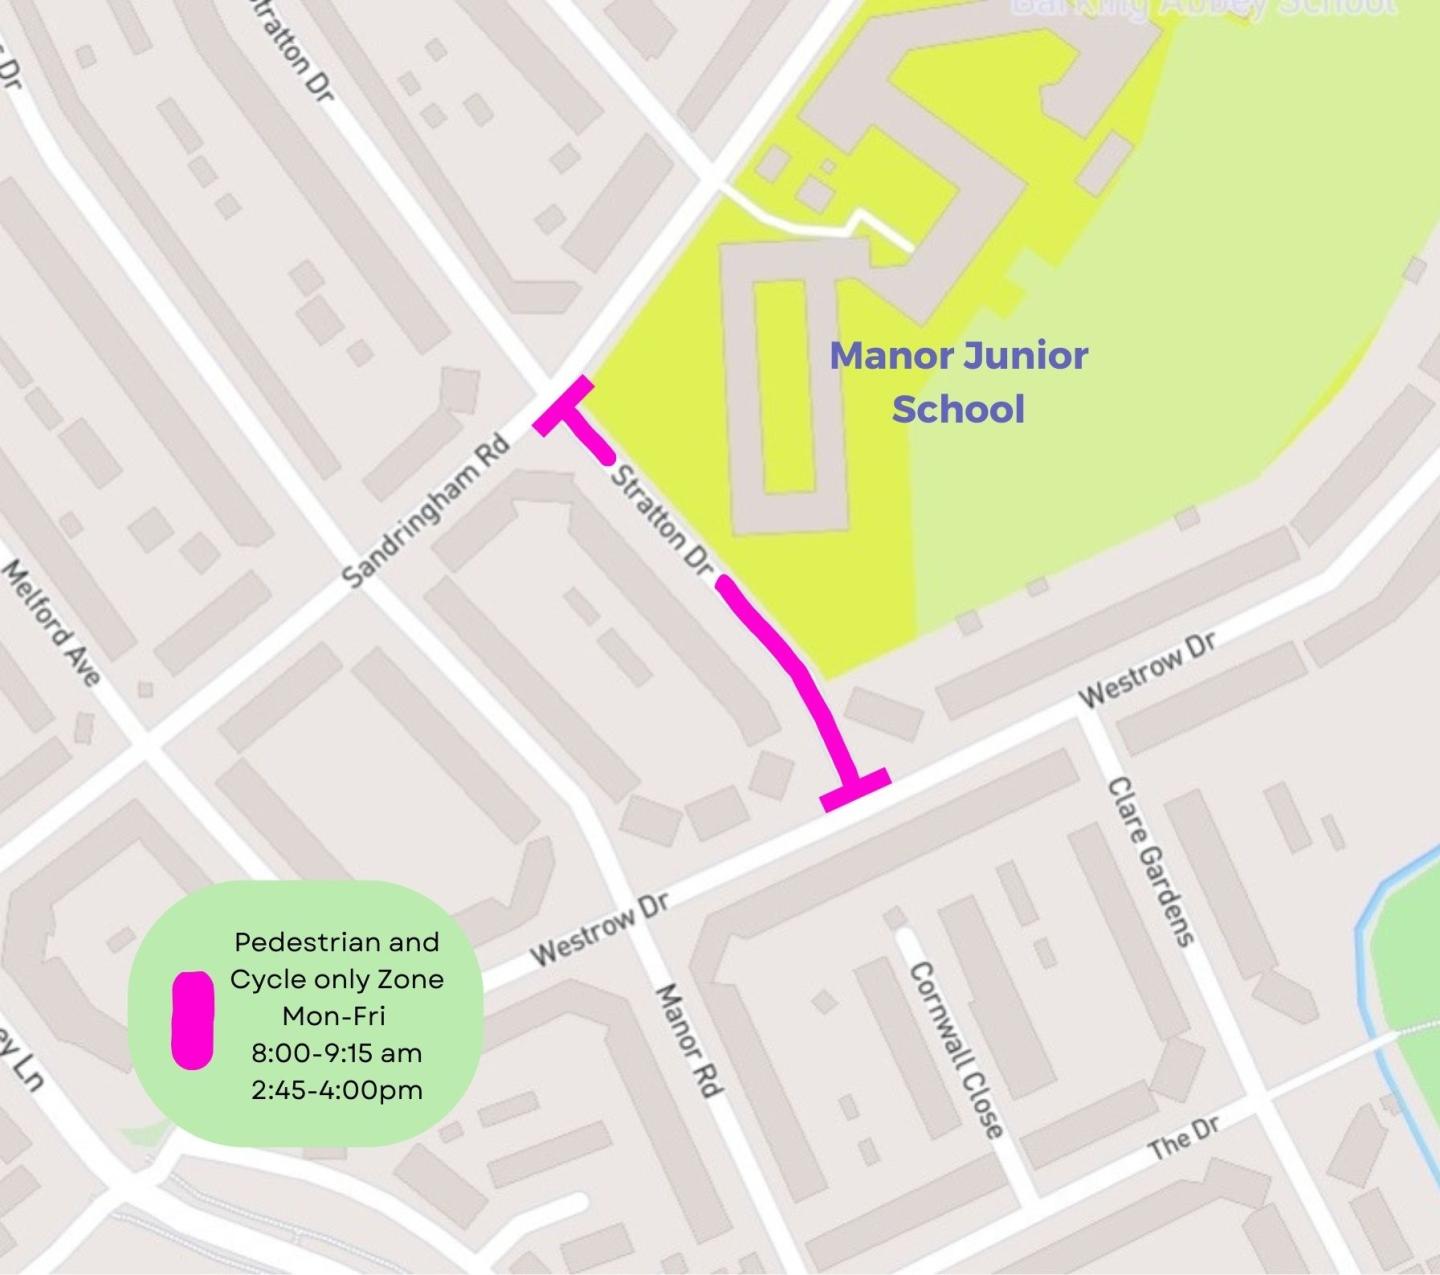 A map showing the location of the School Street for Manor Junior School